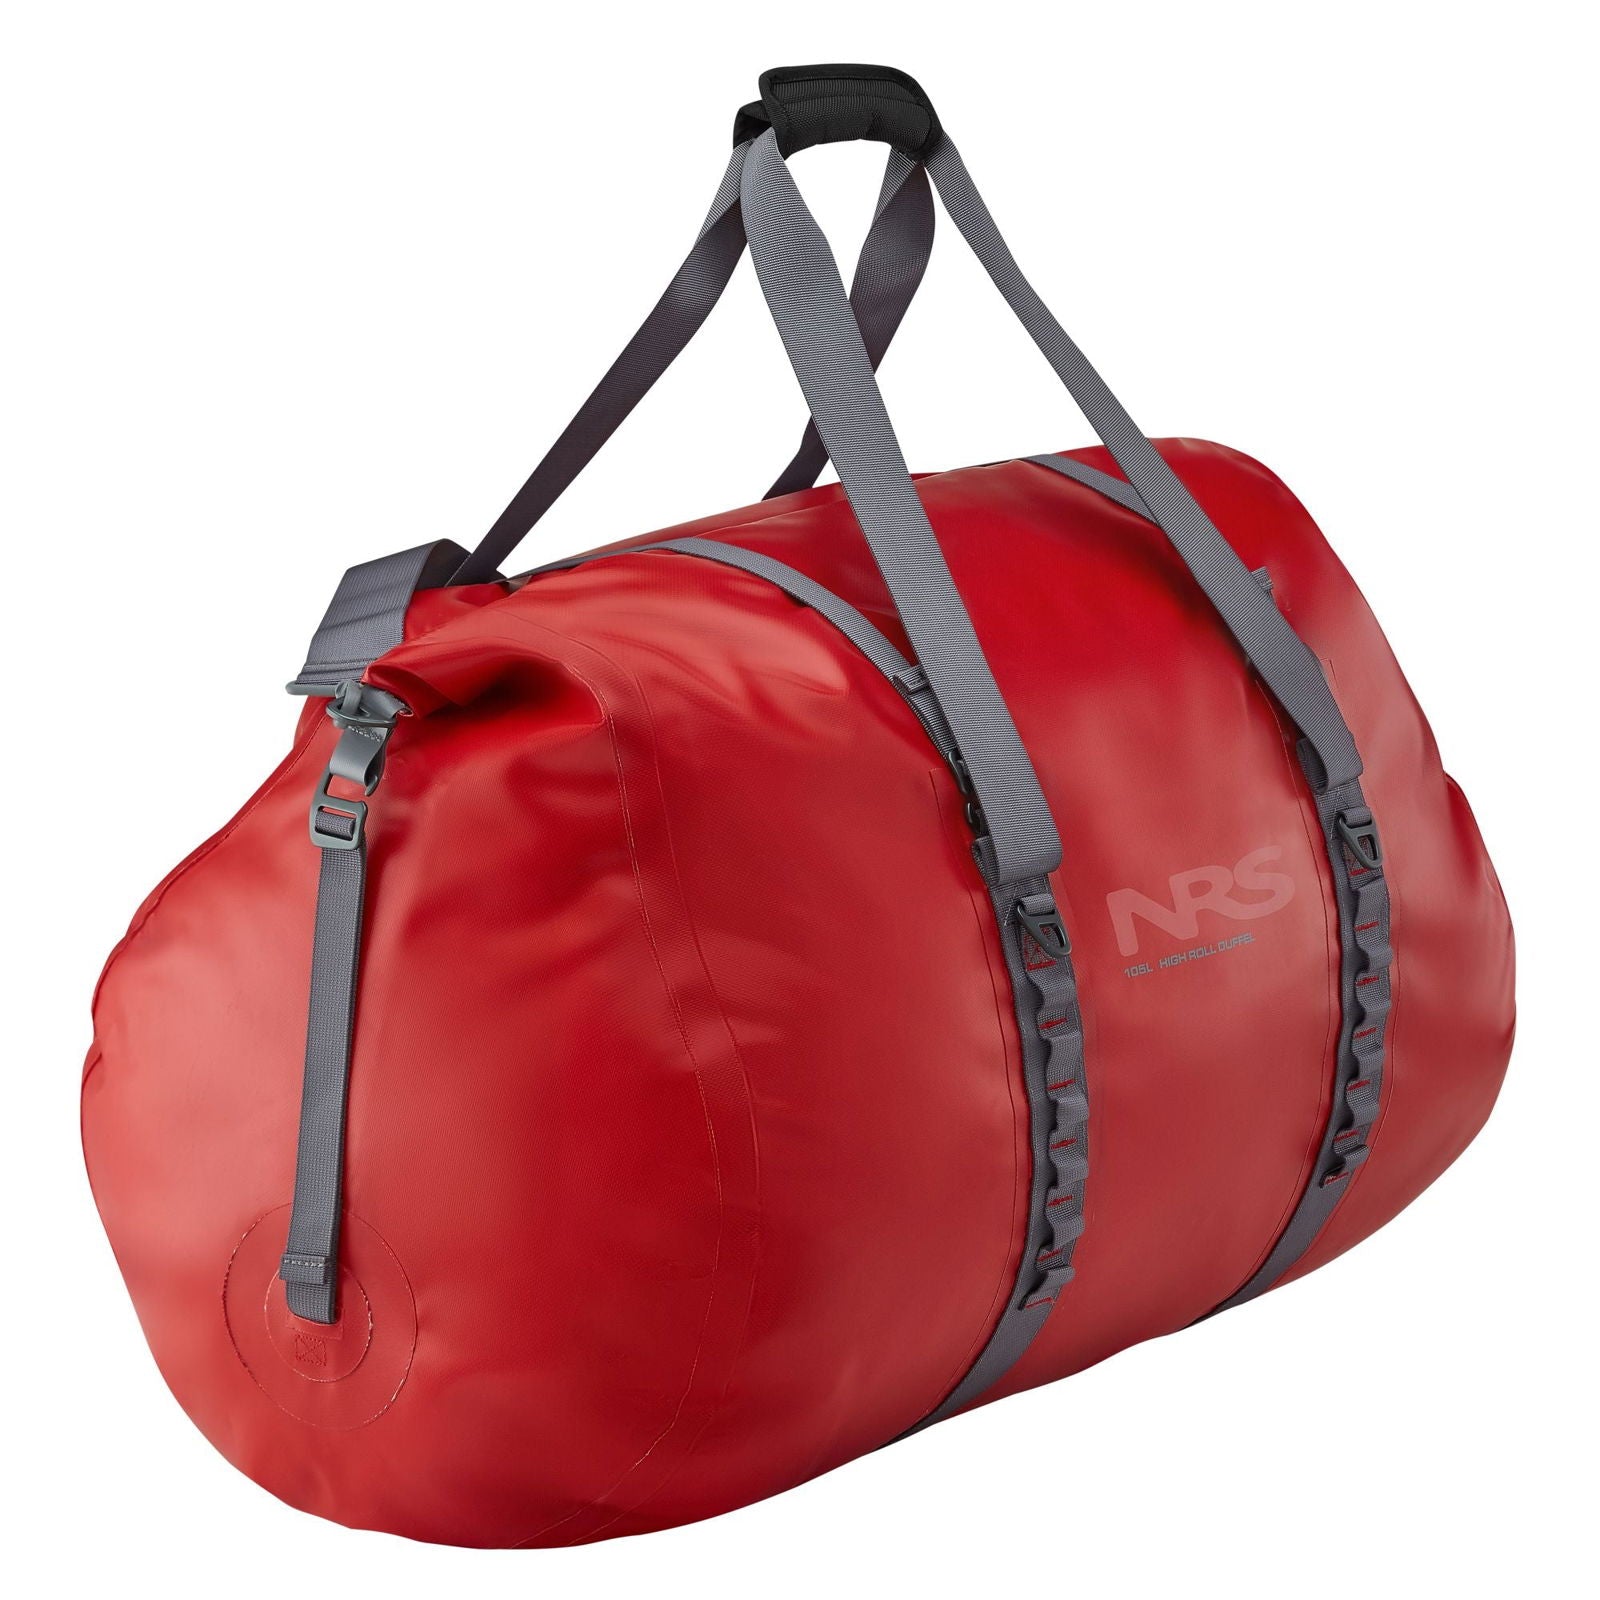   High Roll Duffel Dry Bag  BestCoast Outfitters 